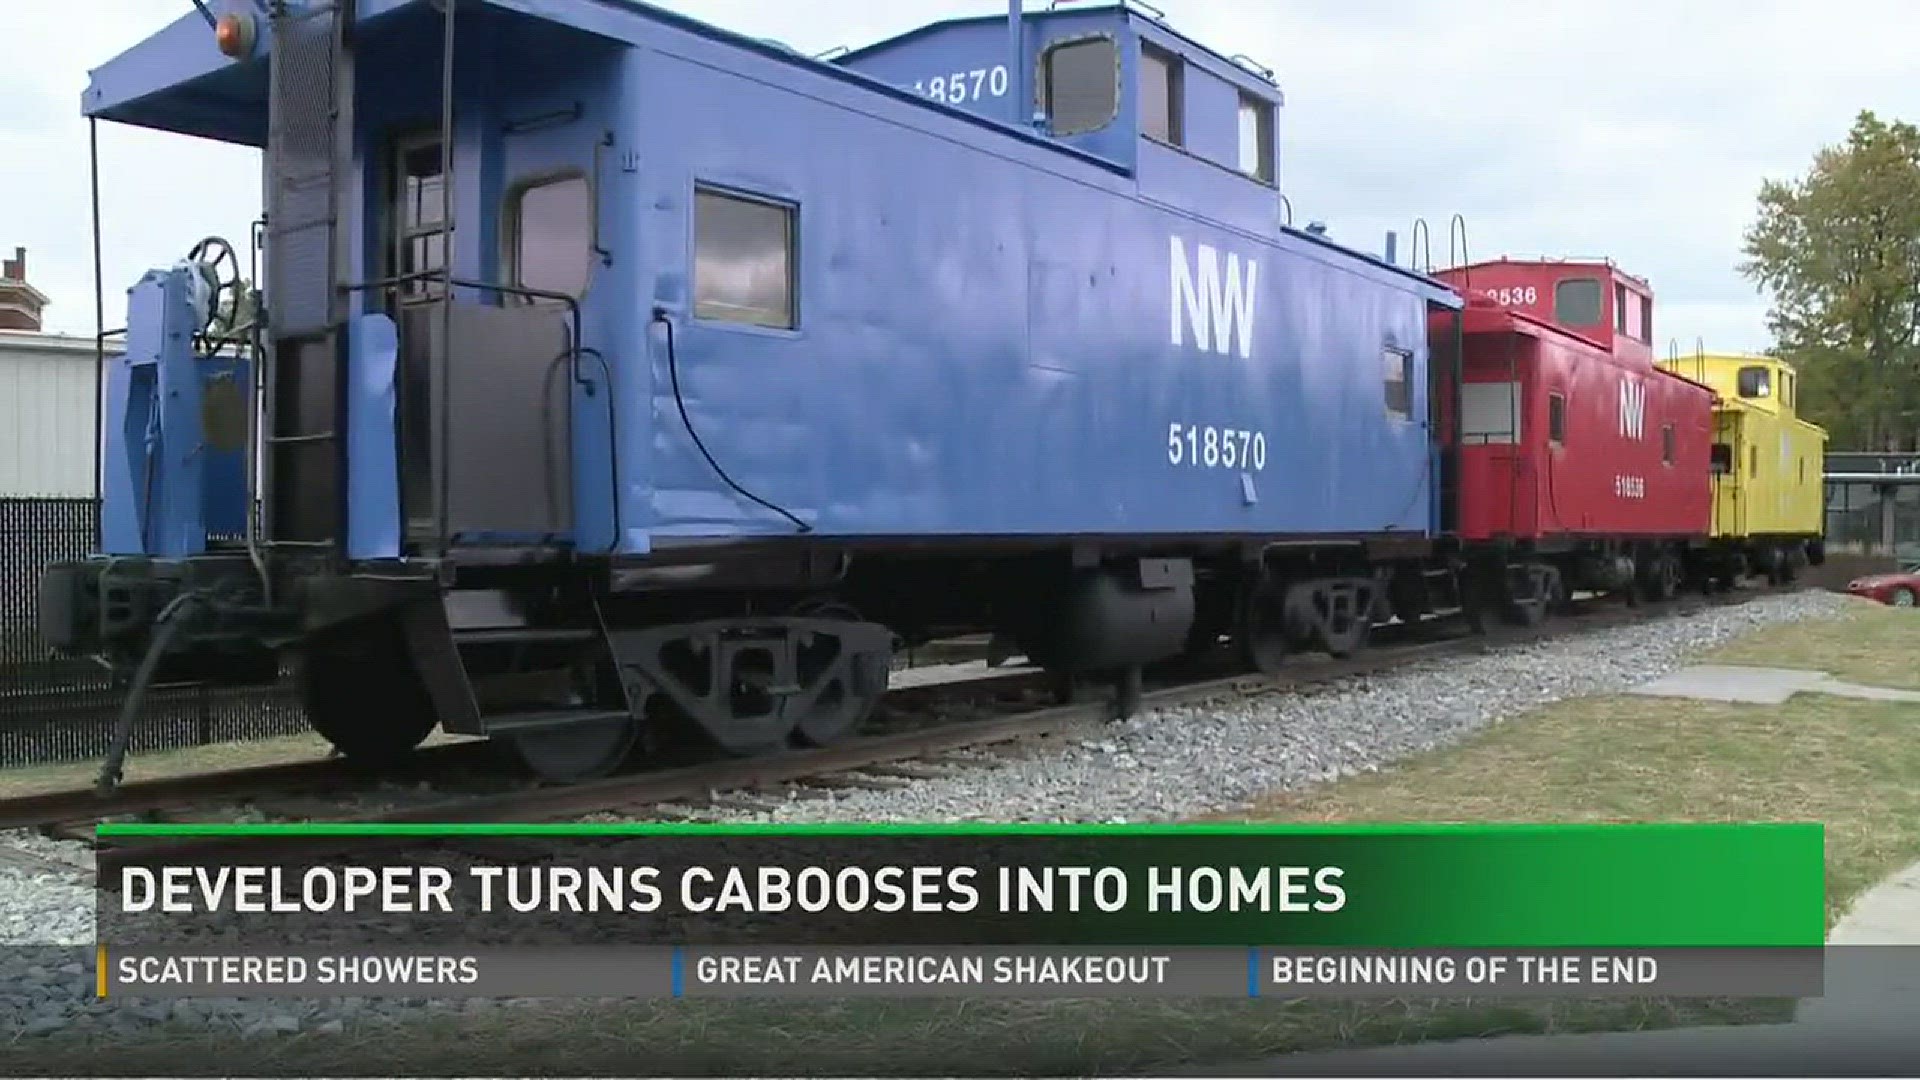 Developer turns cabooses into homes